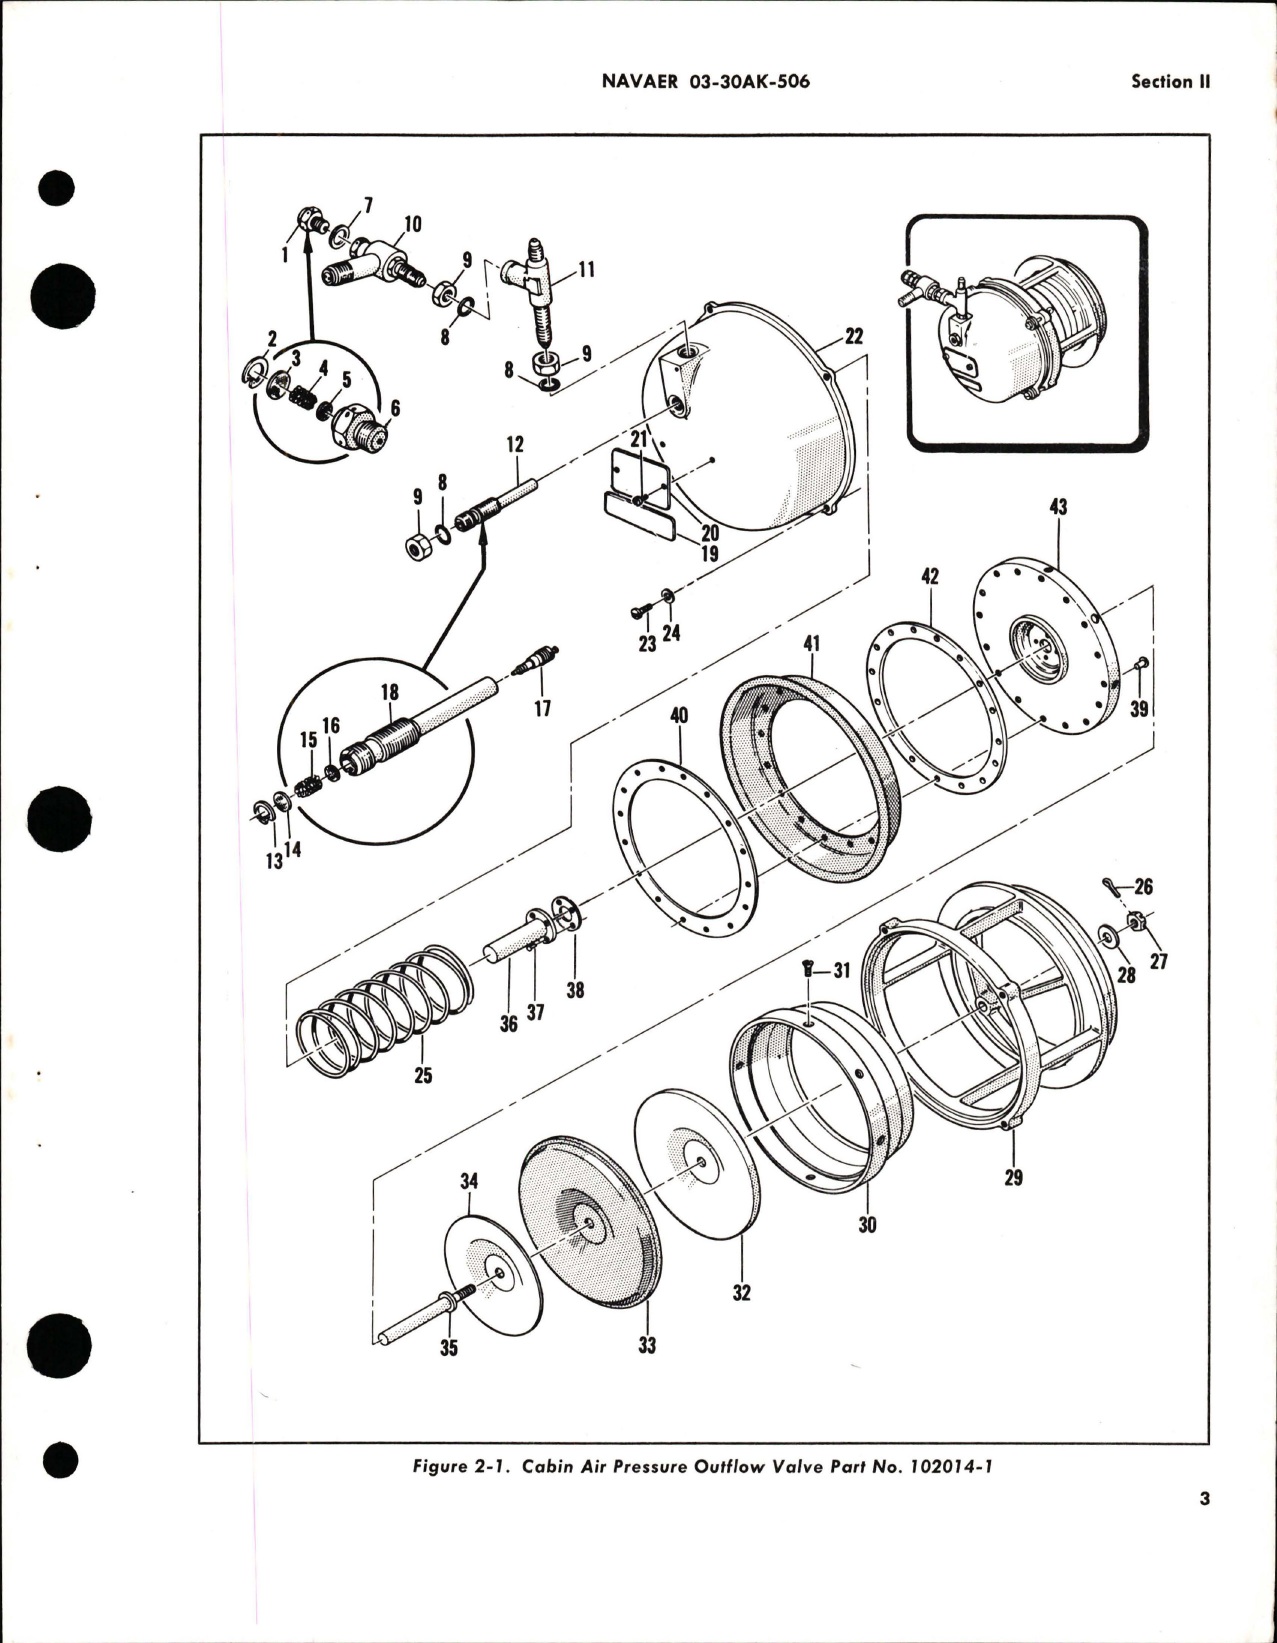 Sample page 7 from AirCorps Library document: Overhaul Instructions for Cabin Air Pressure Outflow Valves